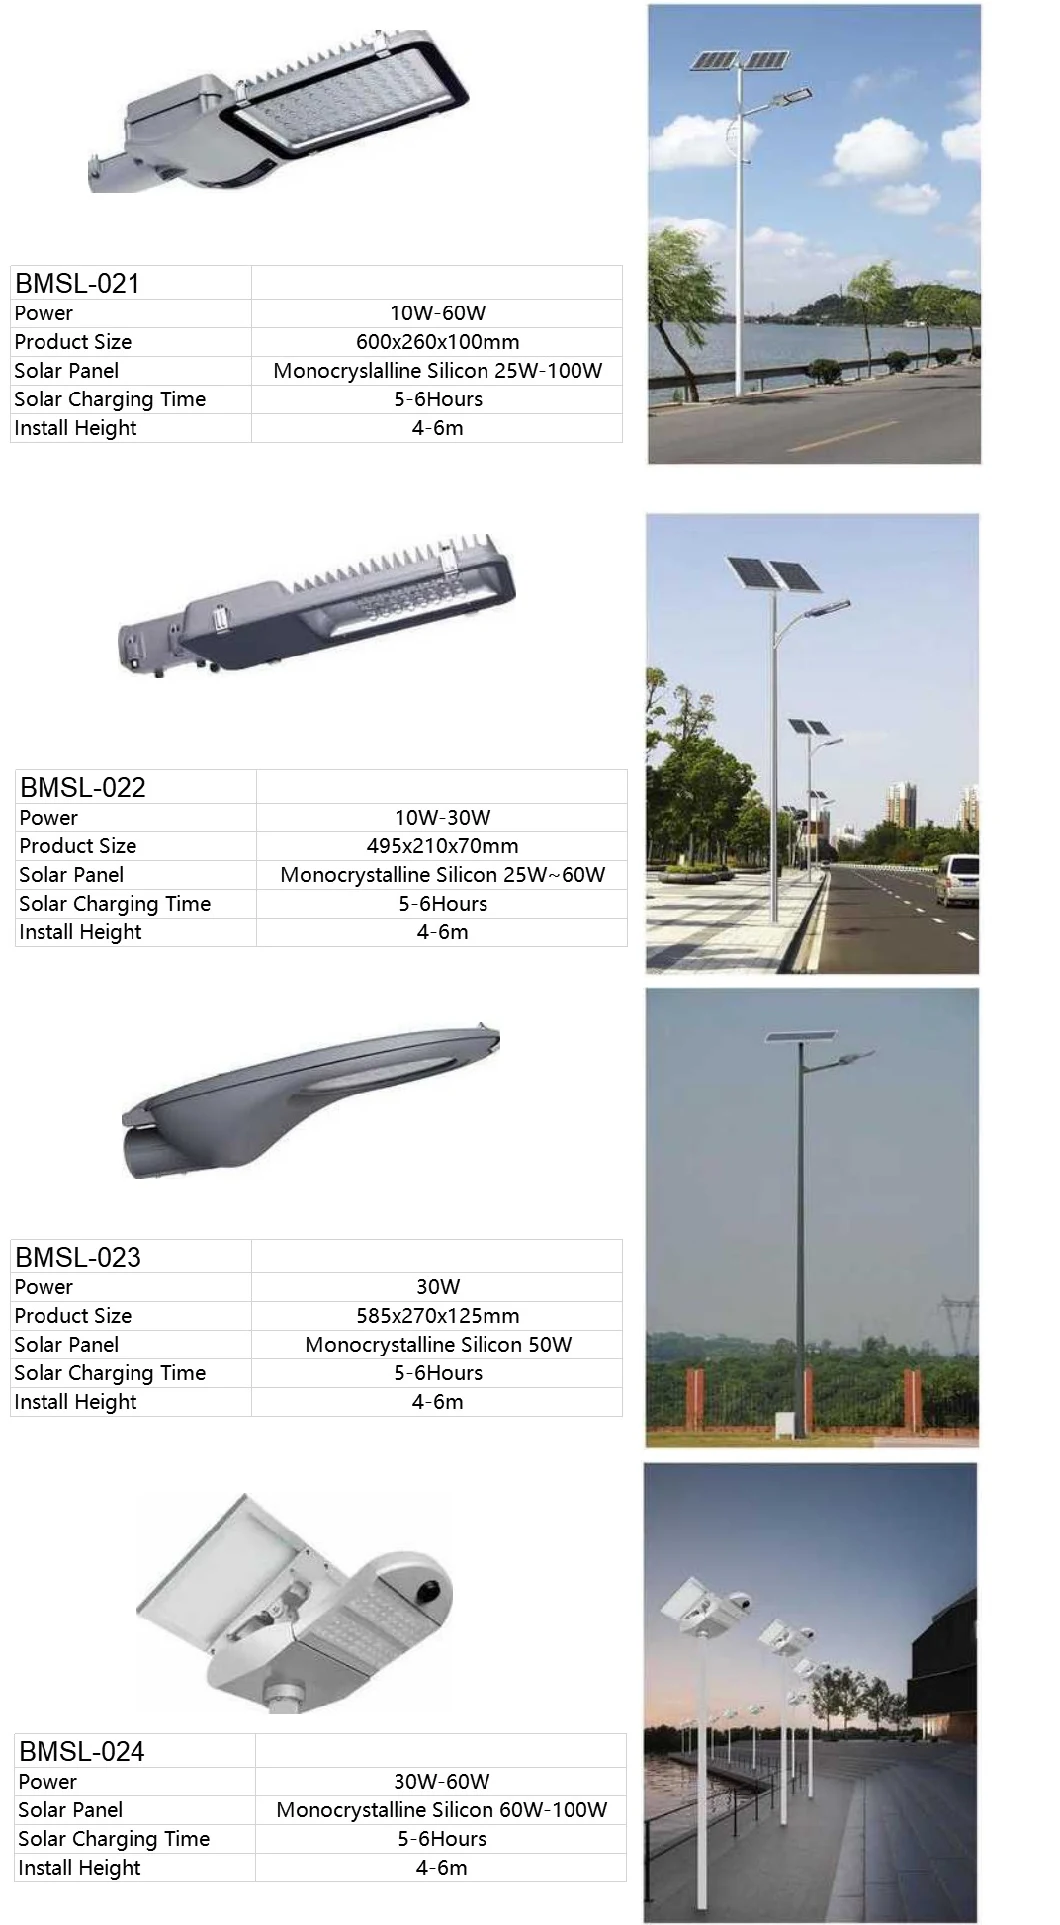 30W Stainless Steel Bolt and Screw Solar Lanter Lamp